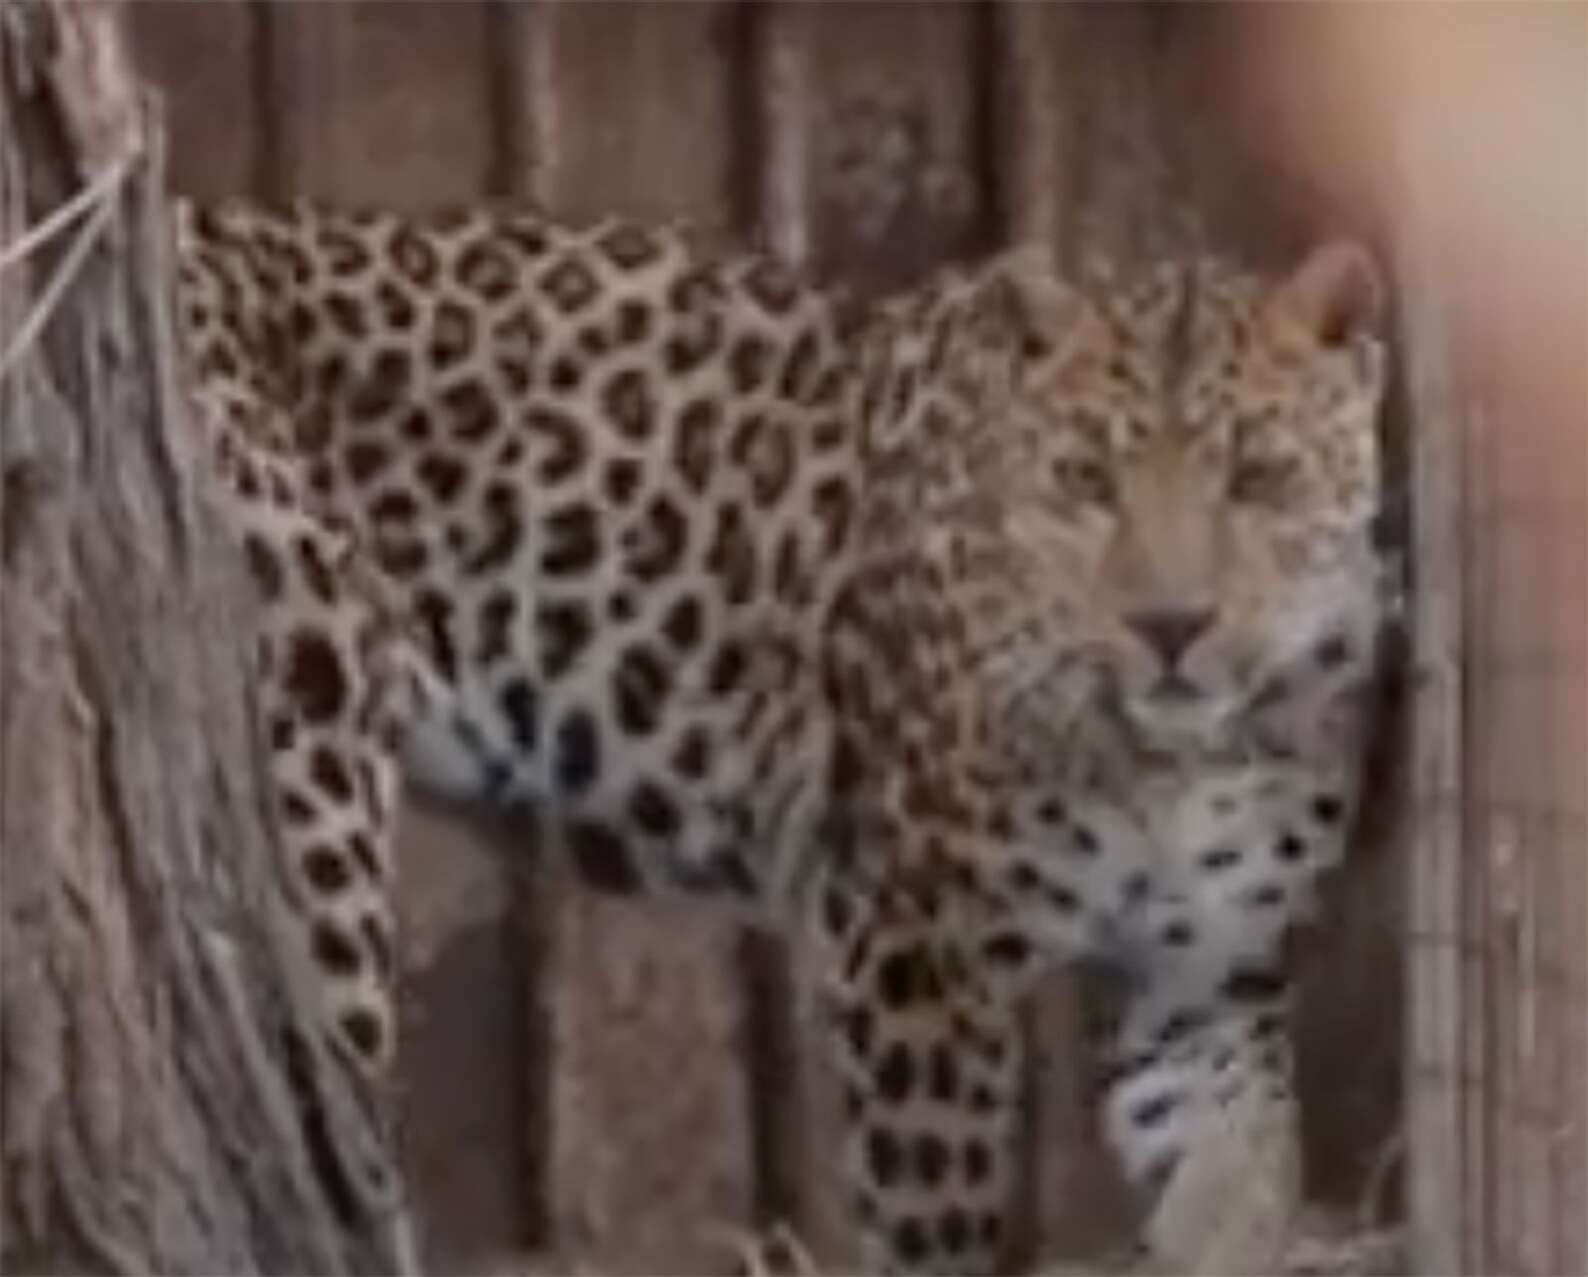 Video: Mariupol zoo animals caught in crossfire – The Journal